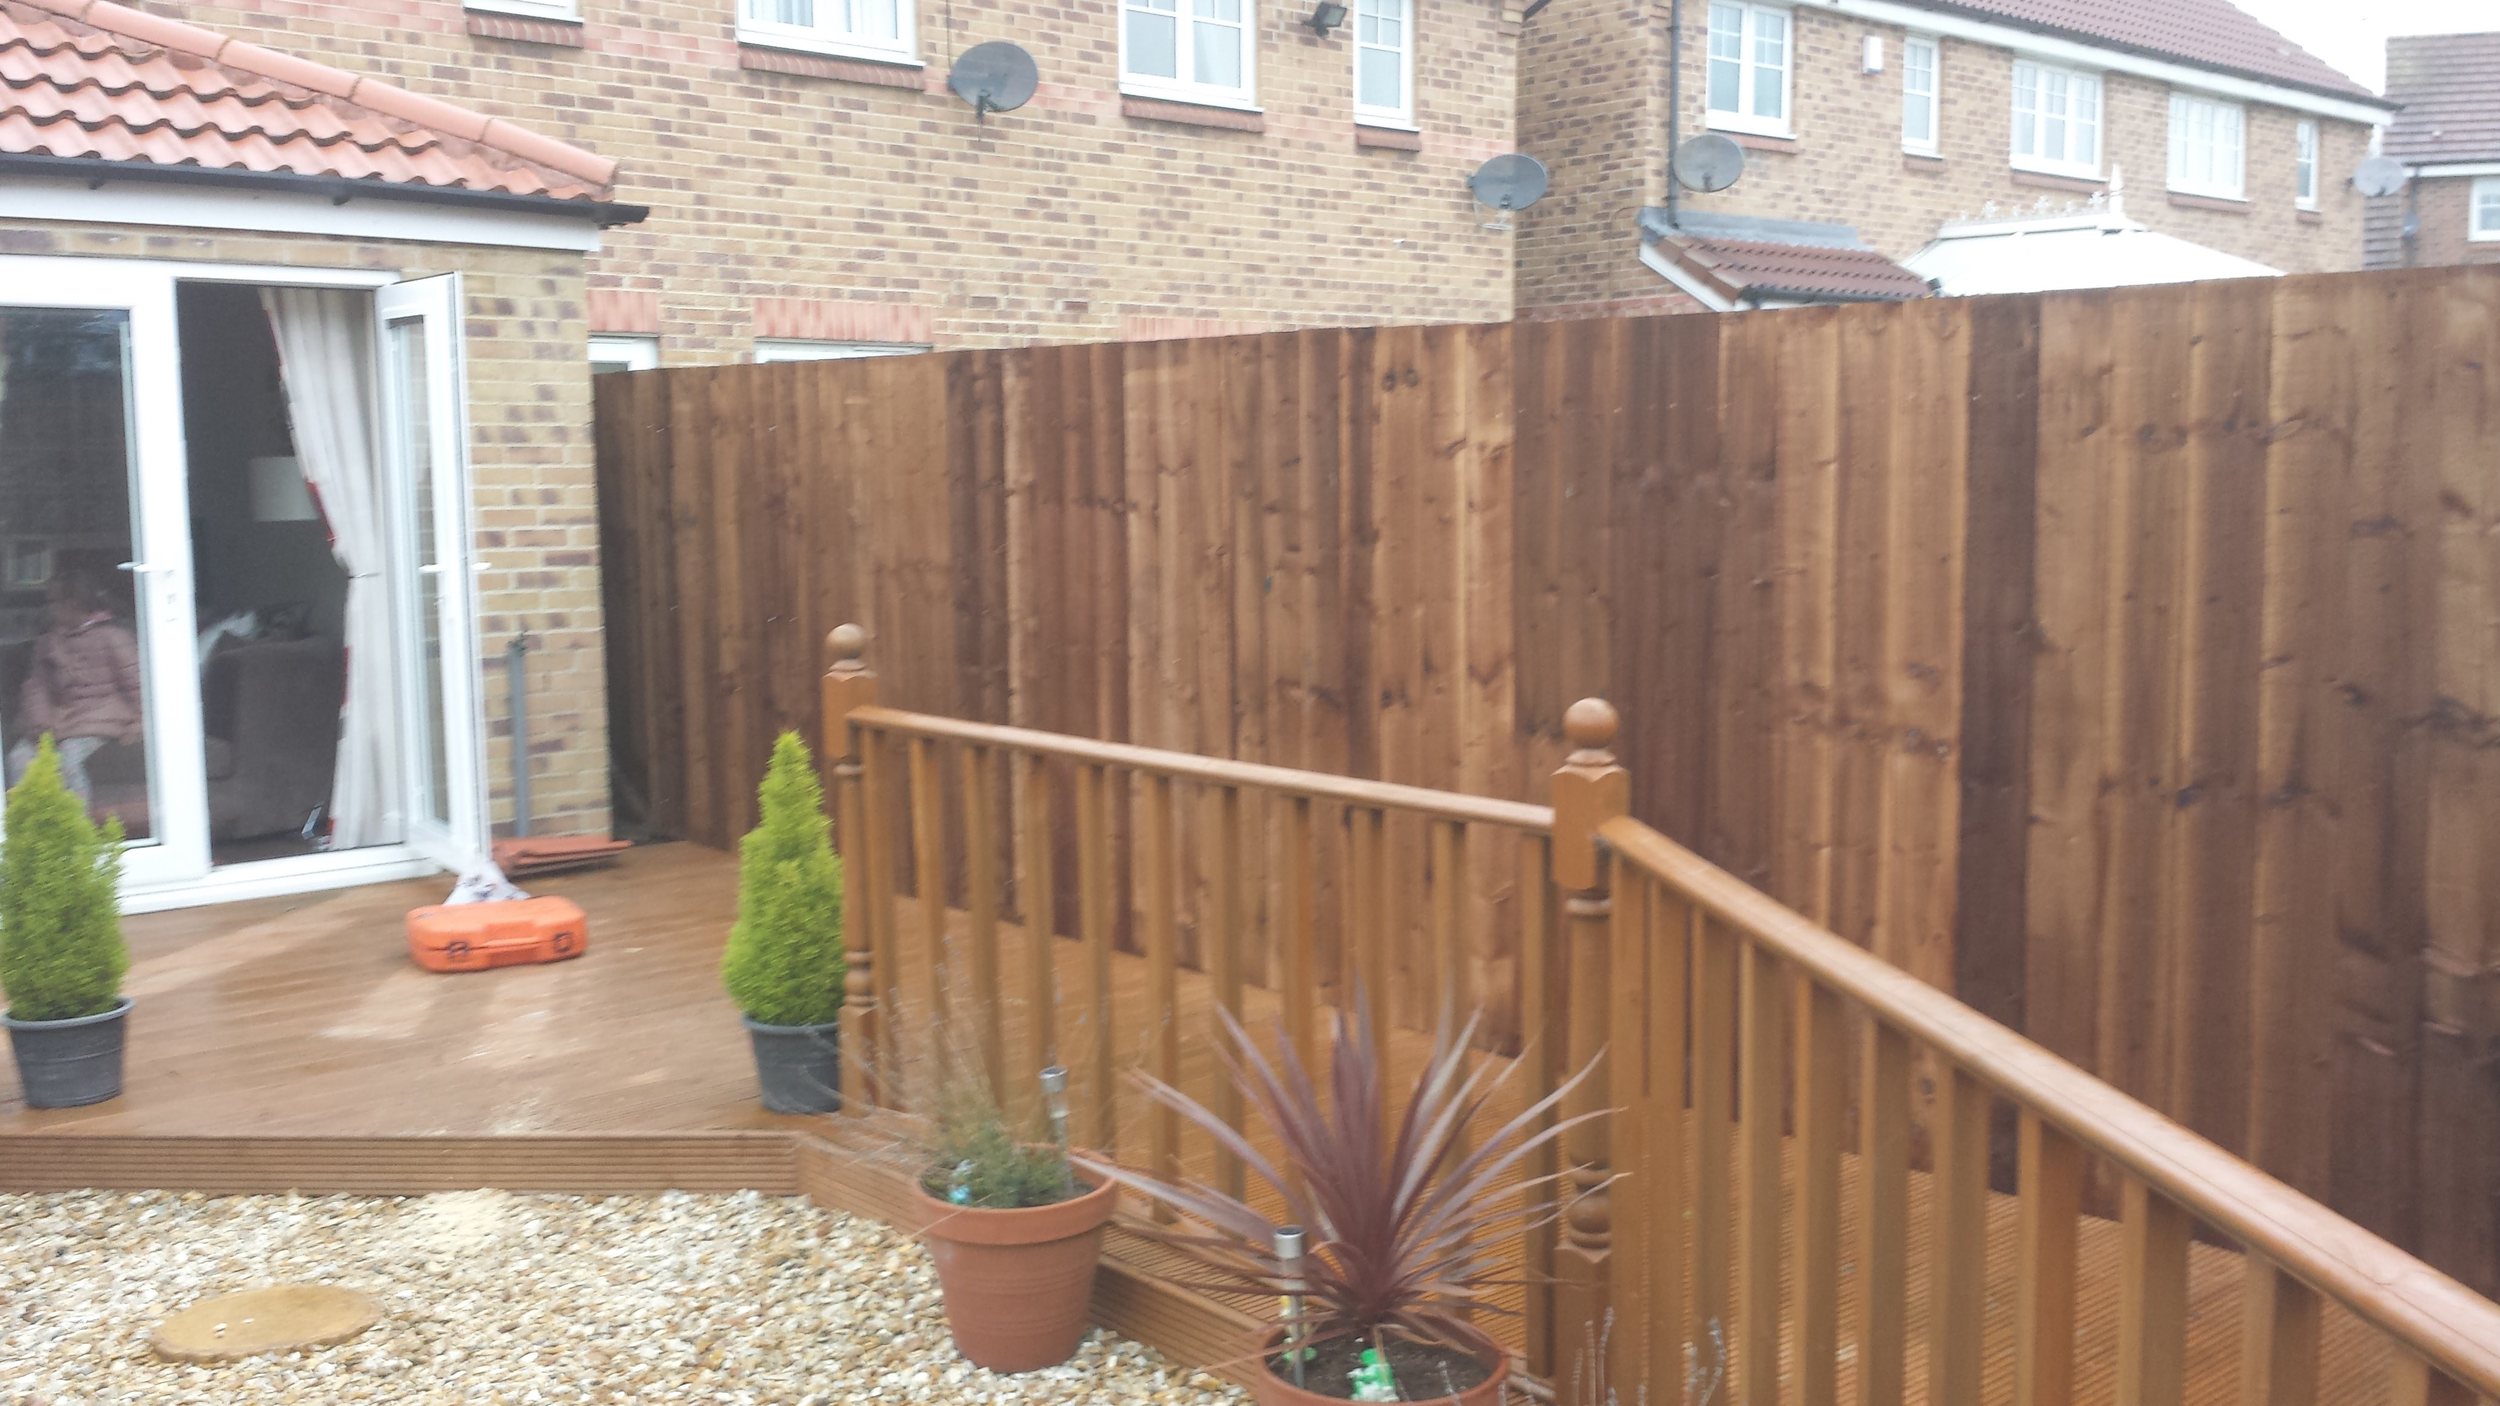 Post and Rail Fencing Brookfield Groundcare Cambridge and Newmarket.jpg